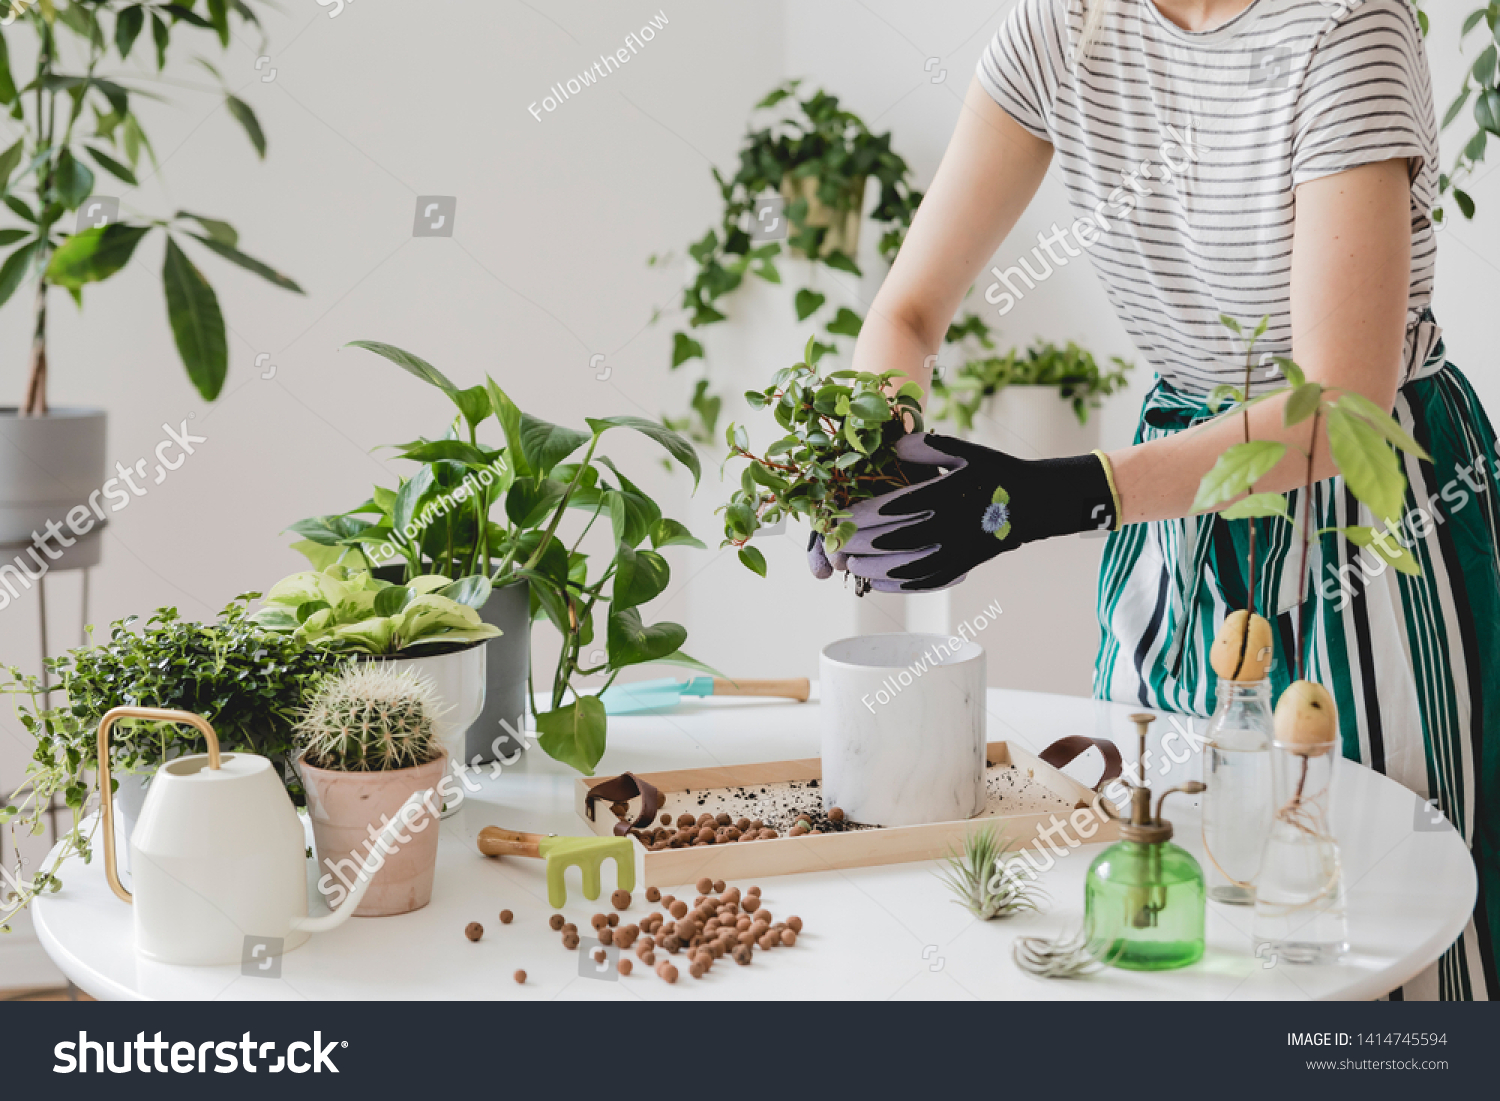 Woman gardeners transplanting plant in ceramic pots on the white wooden table. Concept of home garden. Spring time. Stylish interior with a lot of plants. Taking care of home plants. Template. #1414745594